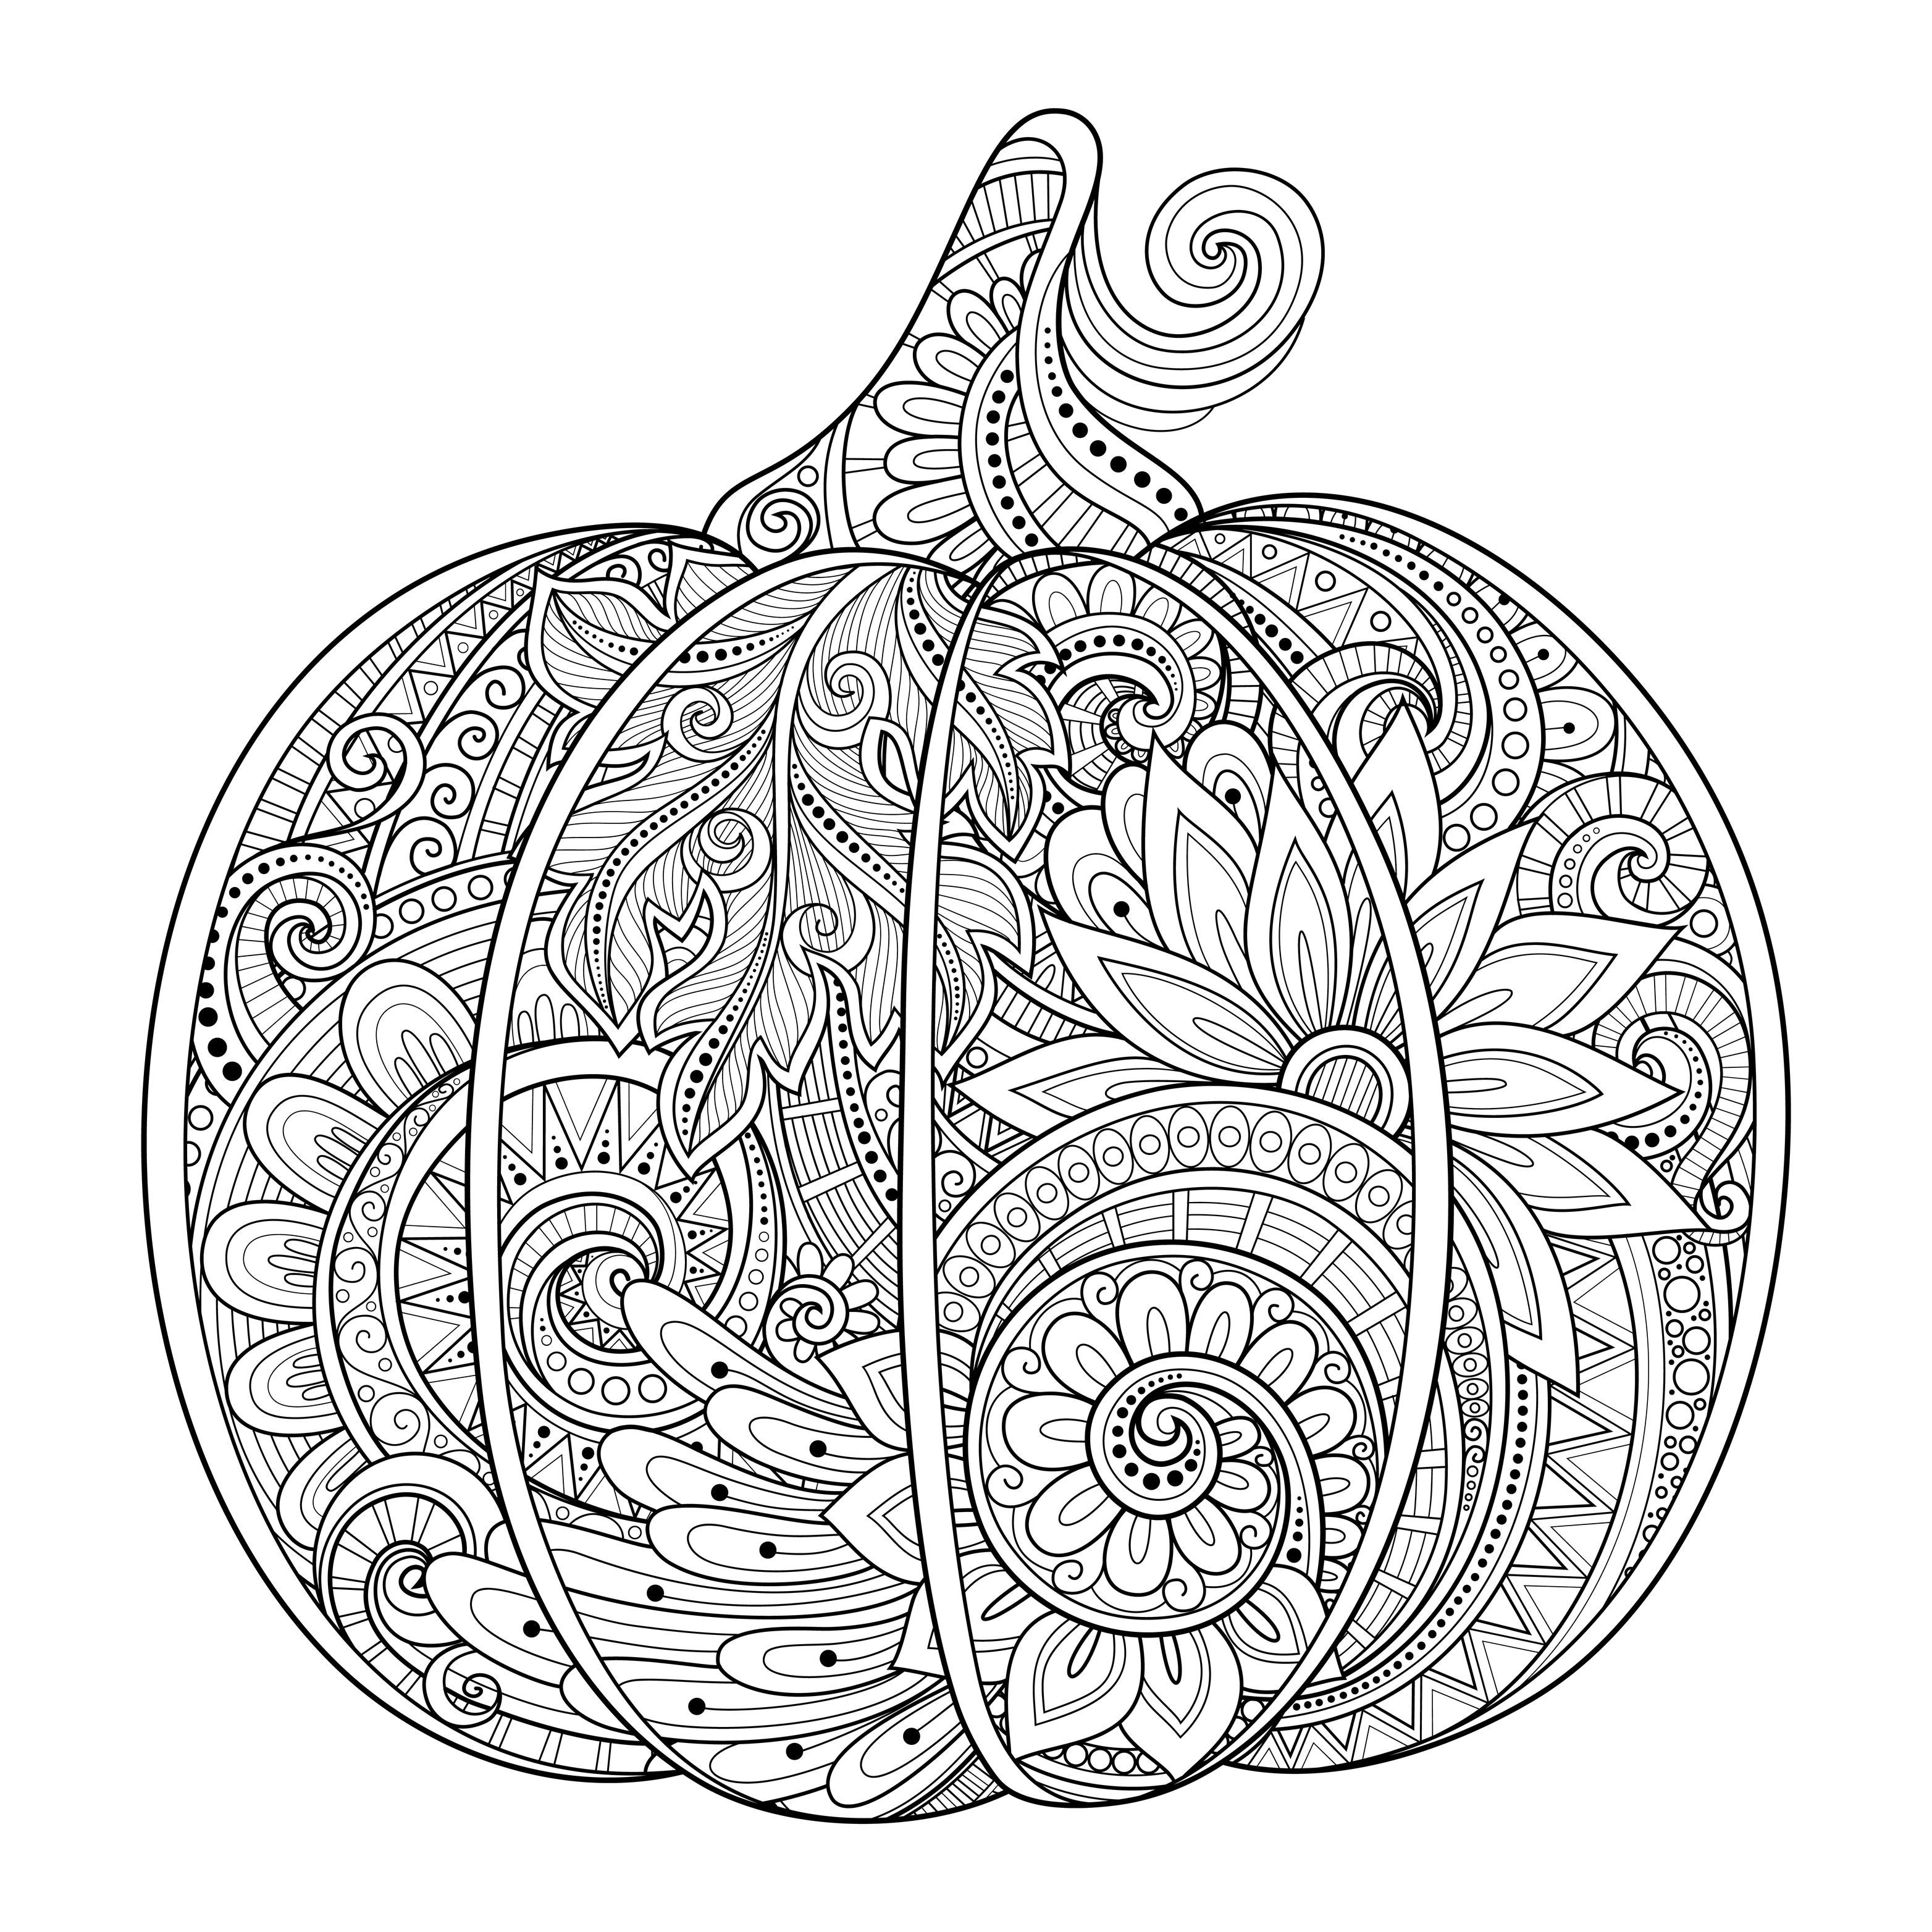 Halloween - Coloring Pages for adults